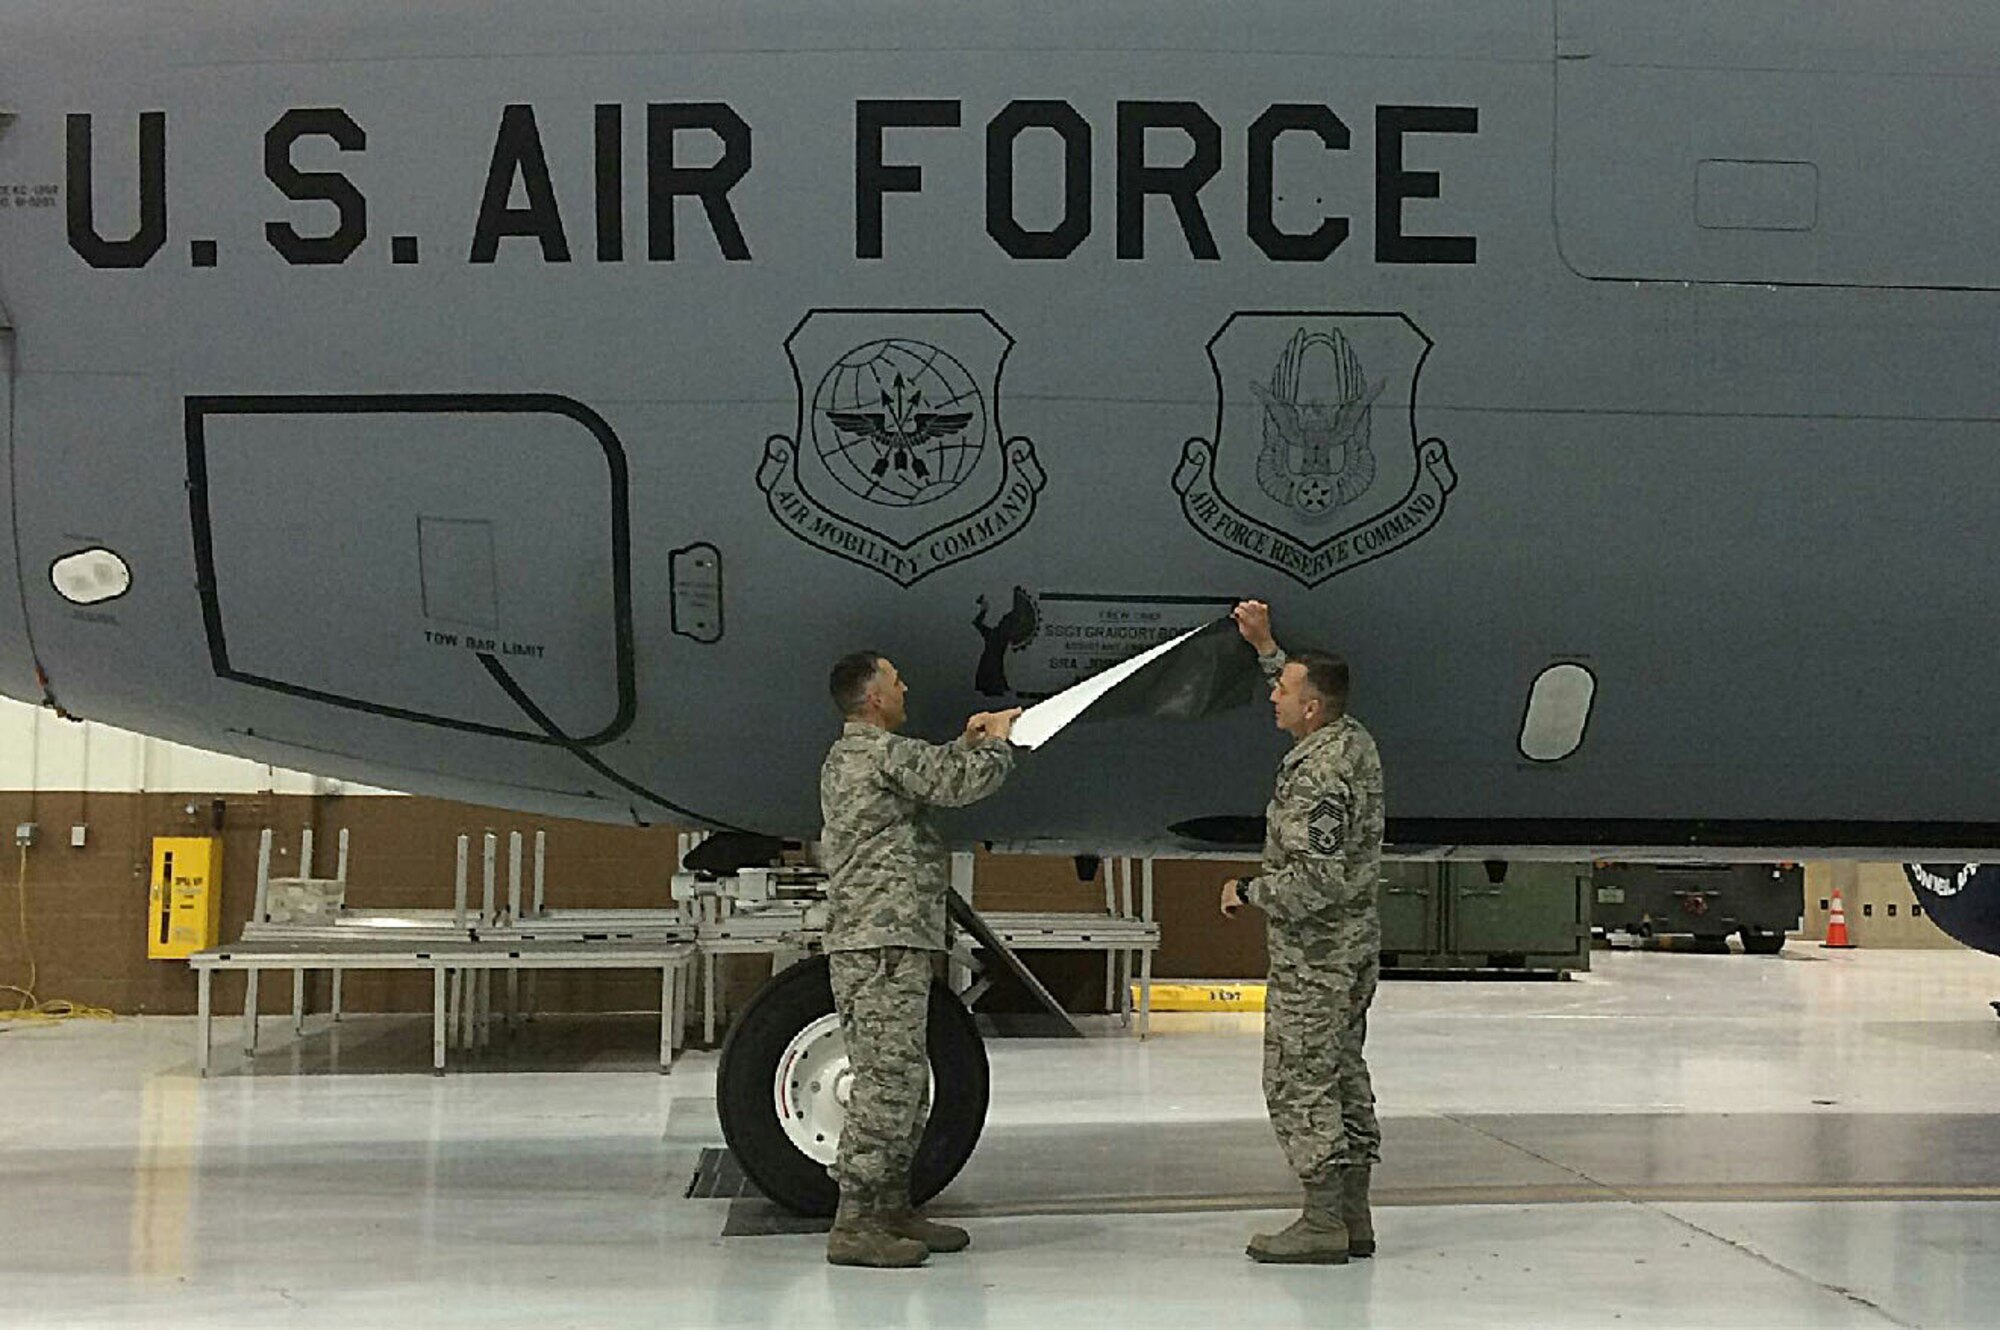 Lt. Col. Duane Richardson, the 22nd Aircraft Maintenance Squadron commander, left, and Chief Master Sgt. Joseph Thomas, the 22nd AMXS superintendent, reveal the dedicated crew chief box on a KC-135 Stratotanker May 2, 2016, at McConnell Air Force Base, Kan. The 22nd AMXS and the 931st Aircraft Maintenance Squadron held a DCC induction ceremony where 58 DCCs and assistant DCCs were assigned to 25 KC-135 Stratotankers. (Courtesy photo)